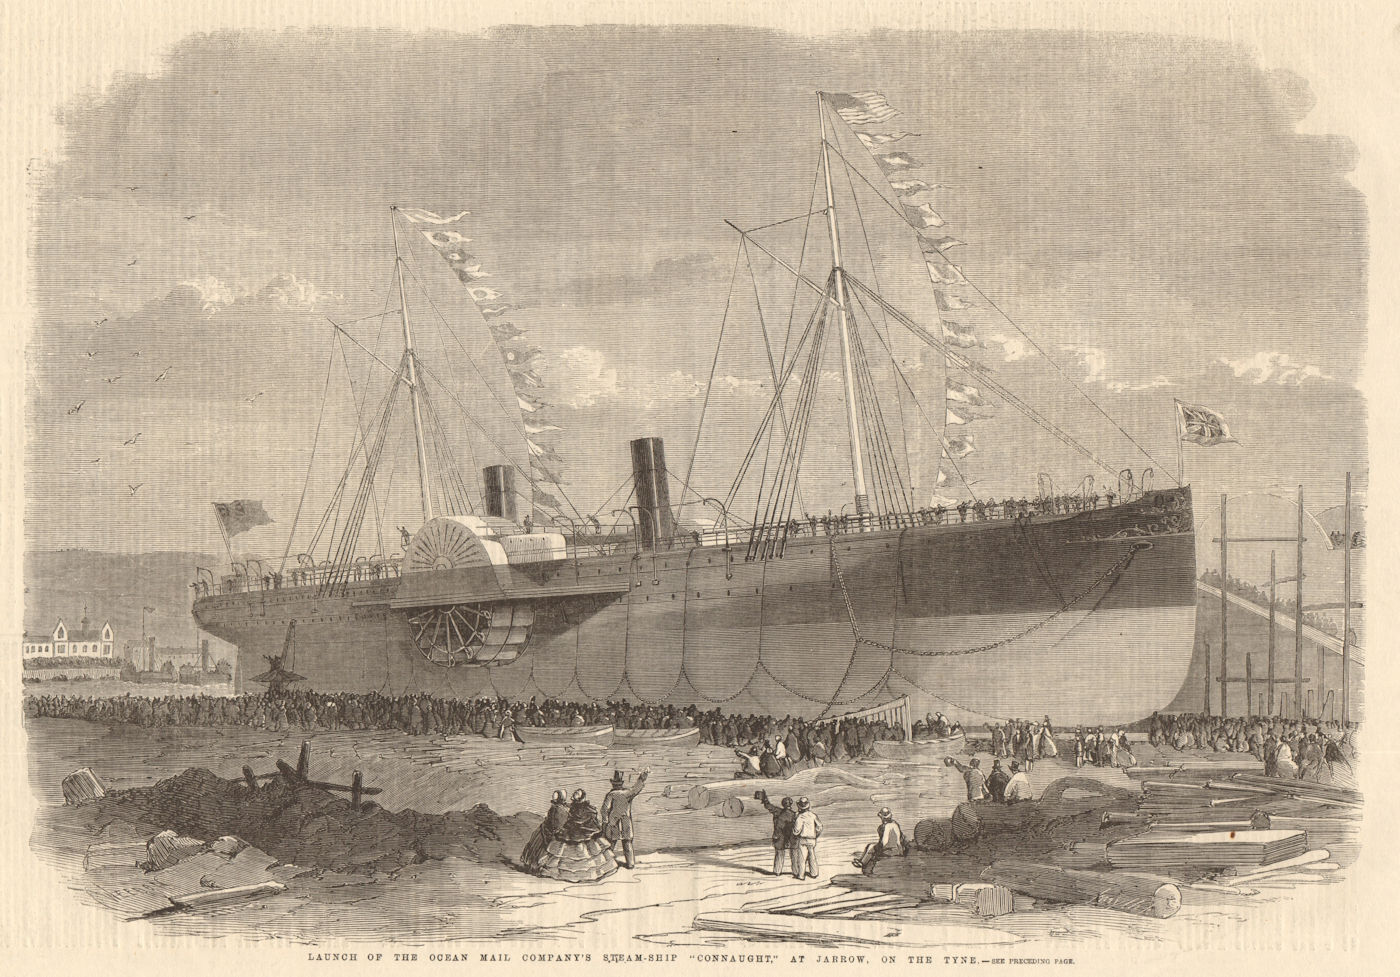 Associate Product Launch of the Ocean Mail Company's steam-ship Connaught at Jarrow, Tyneside 1860